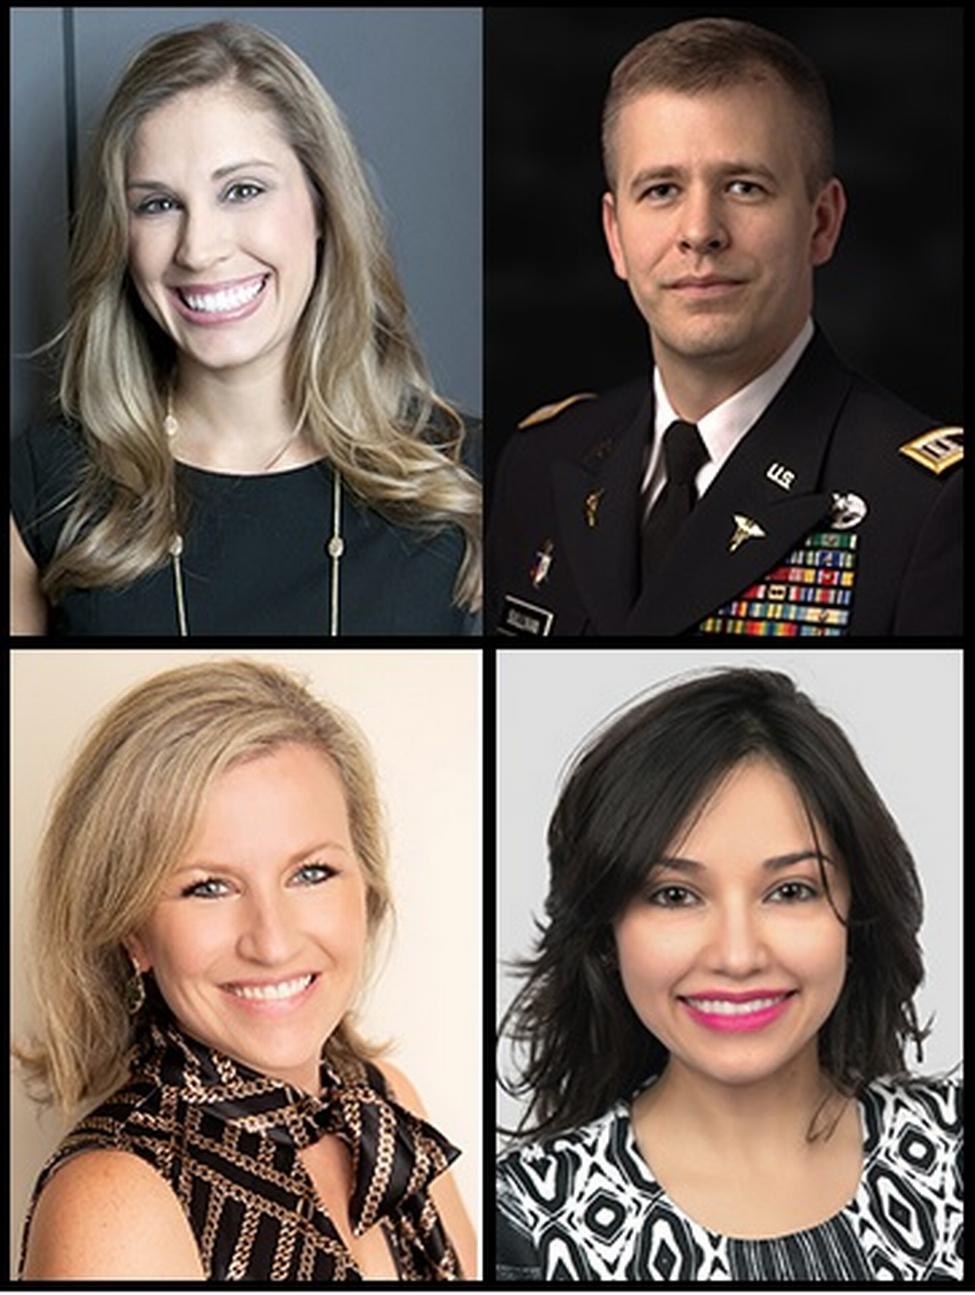 Nominees for Texas New Dentist of the Year™ include UTSD alumni (clockwise from top left) Drs. Katie Stuchlik of Houston, Michael Sullivan of Keene, Melissa Uriegas of Harlingen, and Courtni Tello of Texas City.